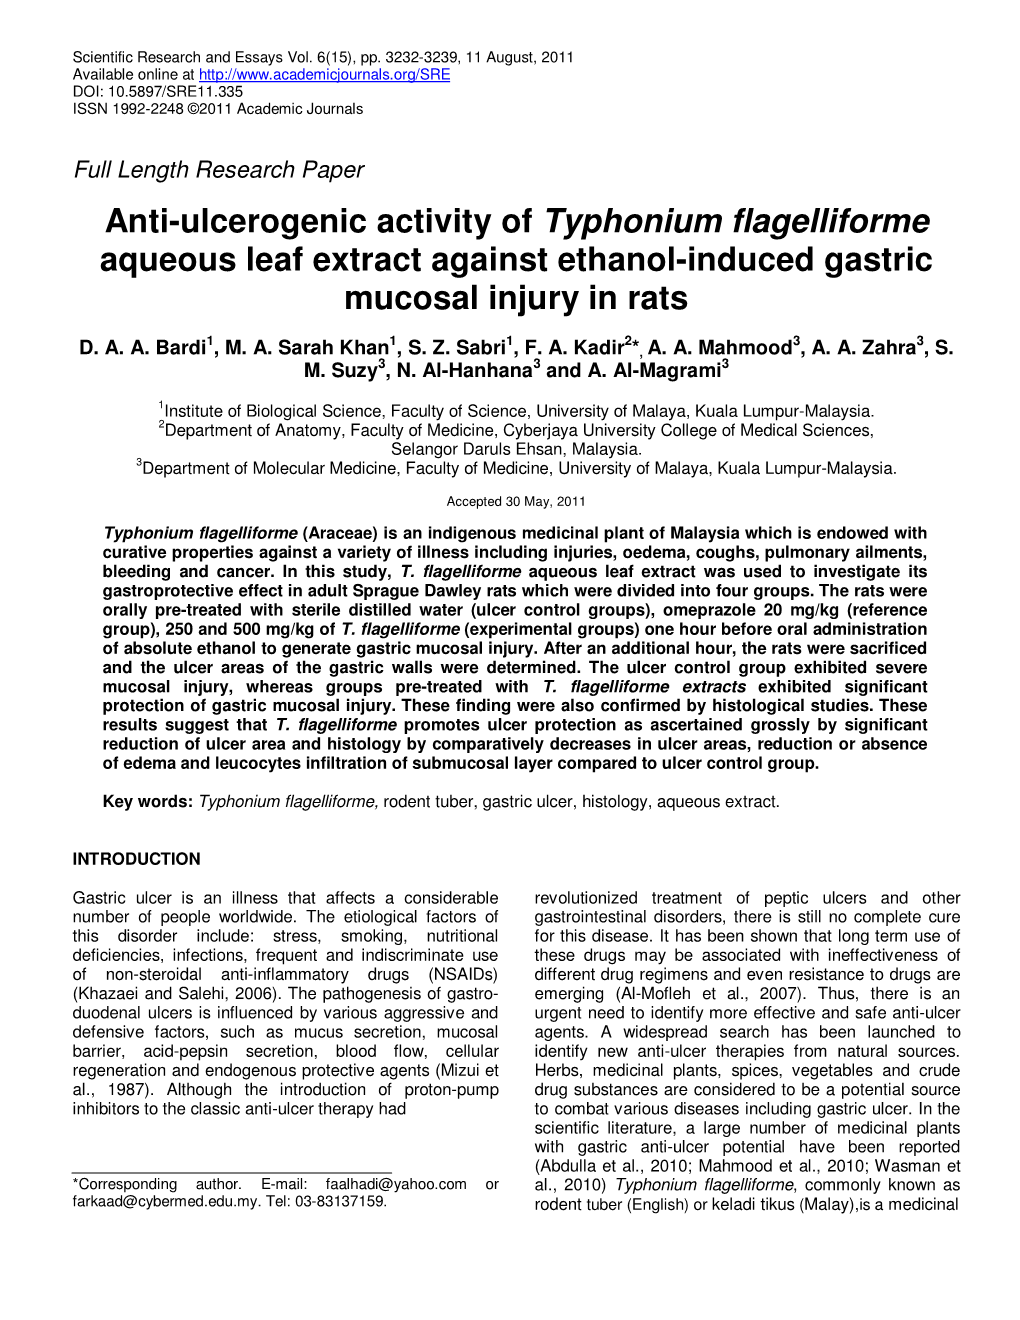 Anti-Ulcerogenic Activity of Typhonium Flagelliforme Aqueous Leaf Extract Against Ethanol-Induced Gastric Mucosal Injury in Rats